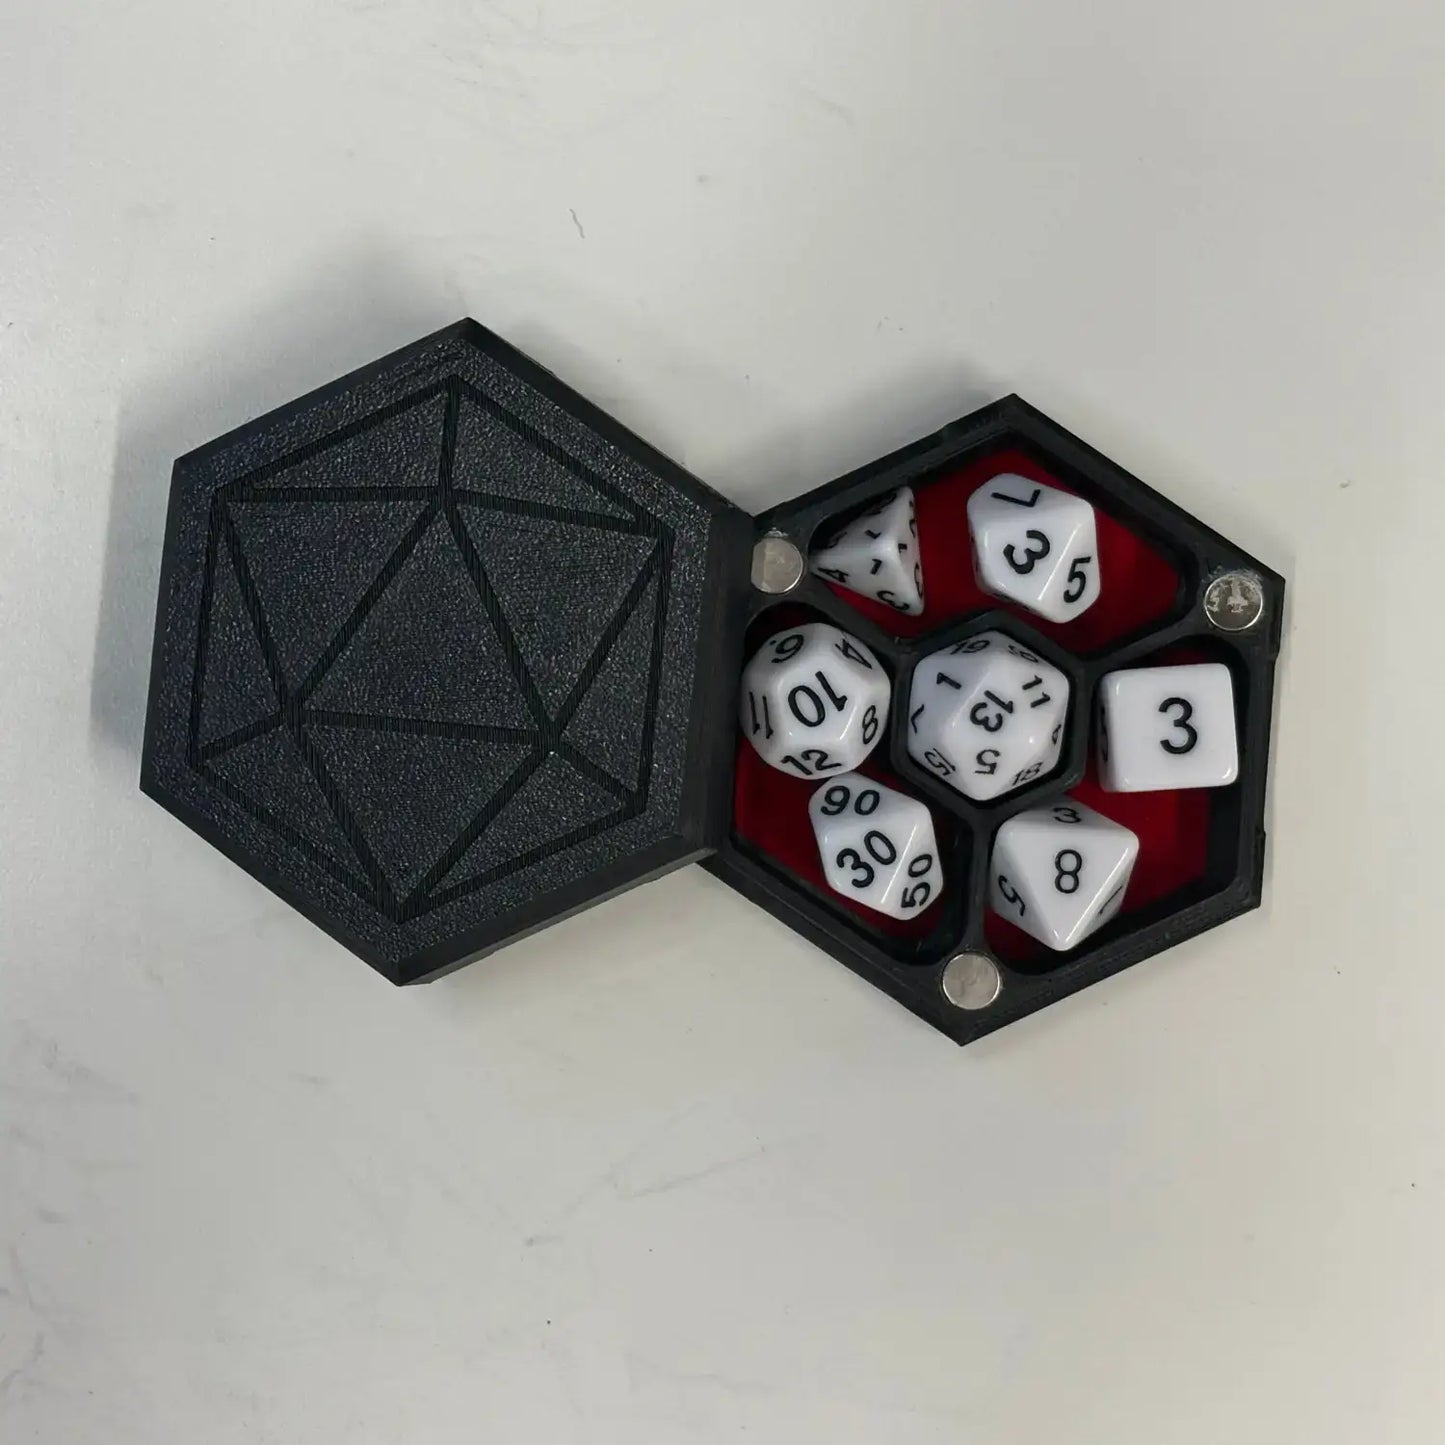 Felt lined Dice Box for DnD or table top games - Black Case